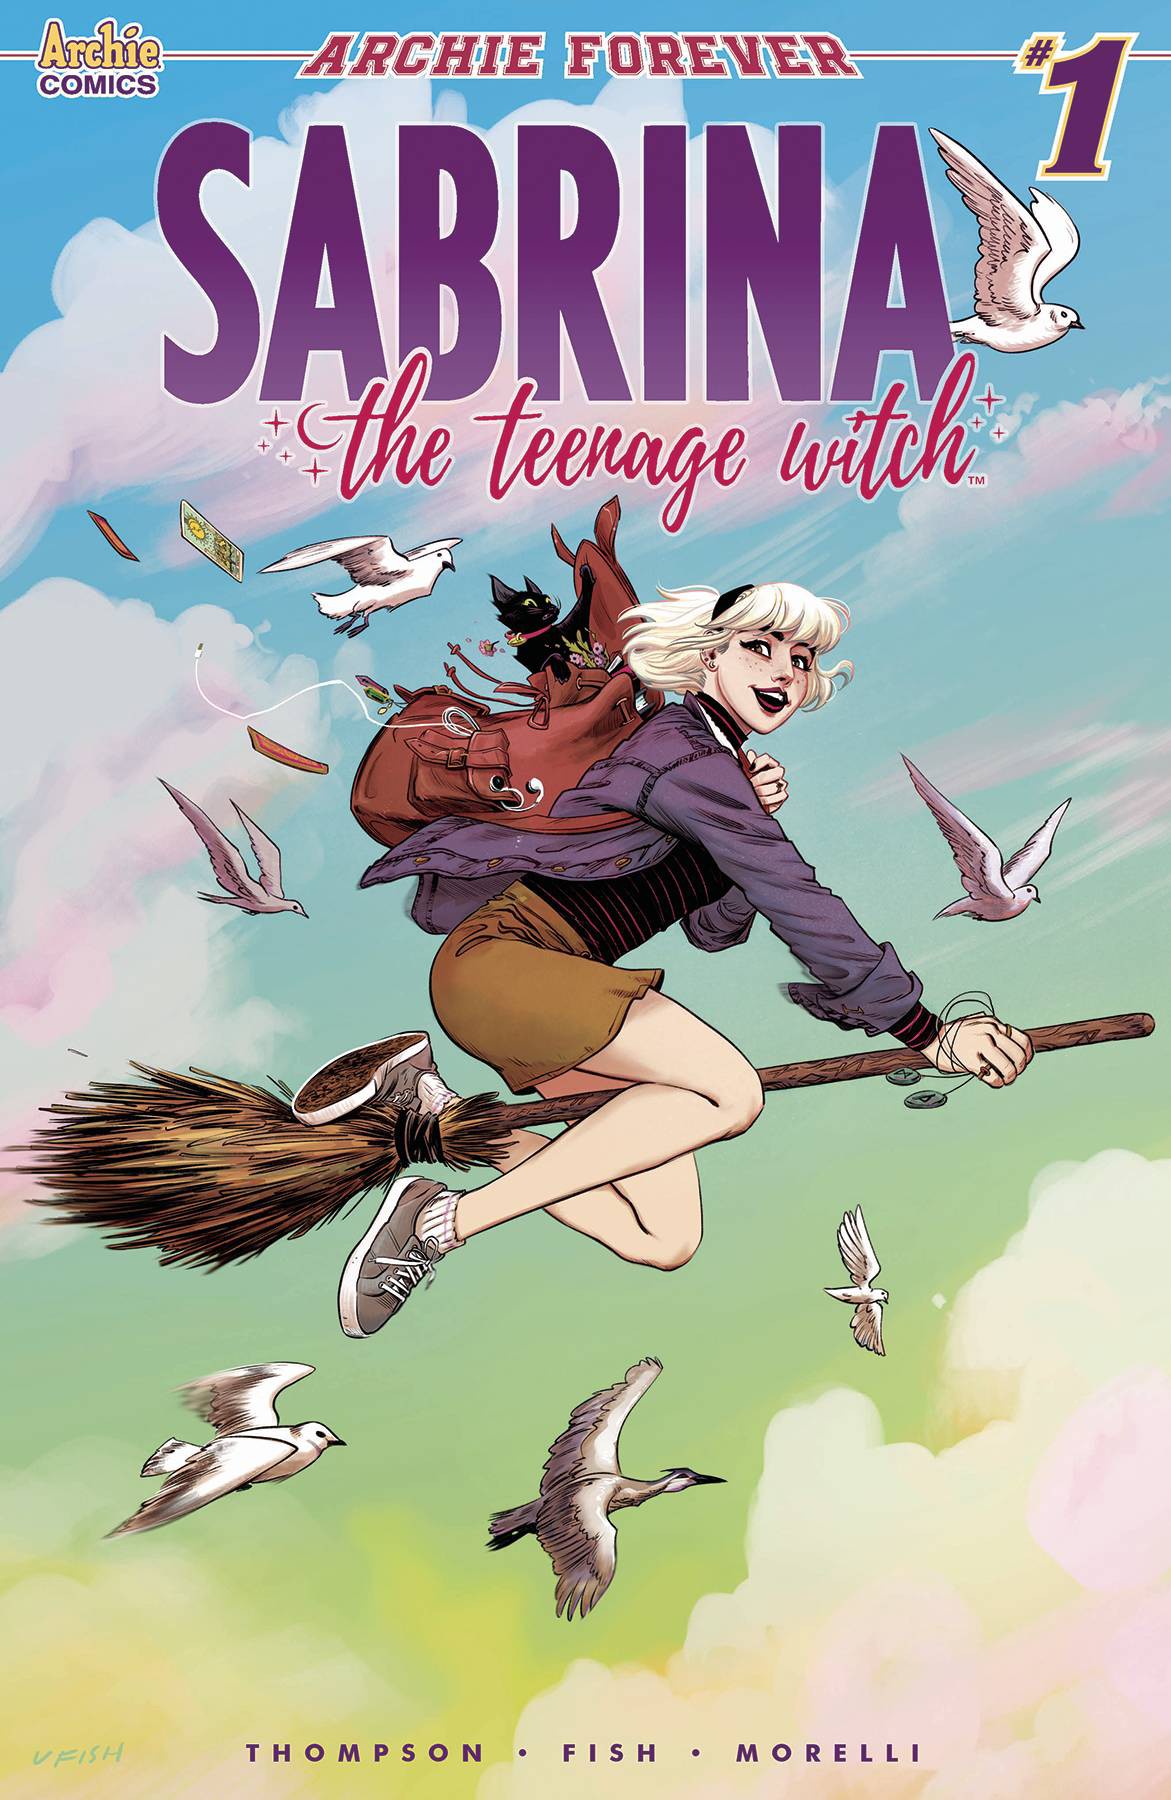 The Complete Sabrina the Teenage Witch by Archie Comics